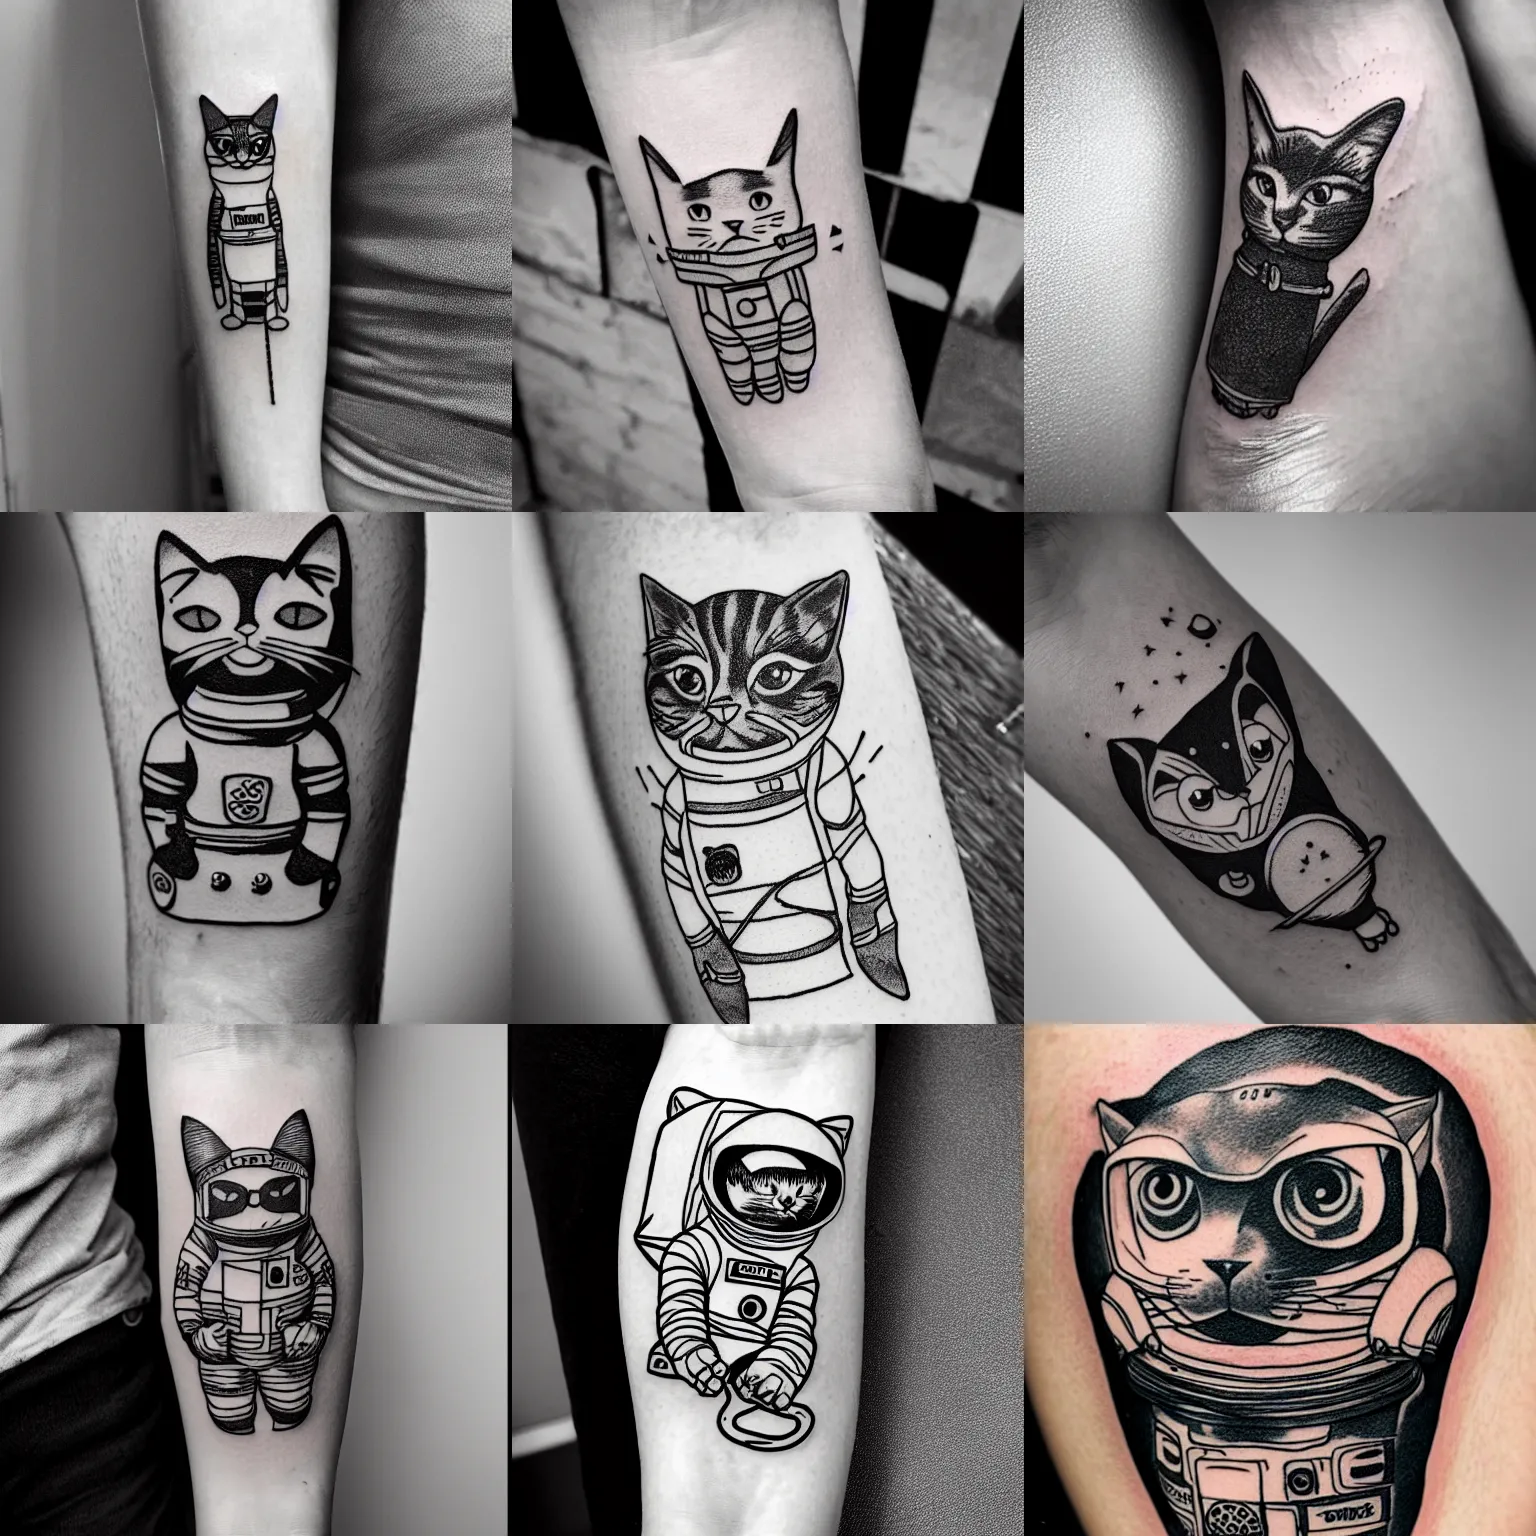 Cat tattoo by Cloud9images on DeviantArt